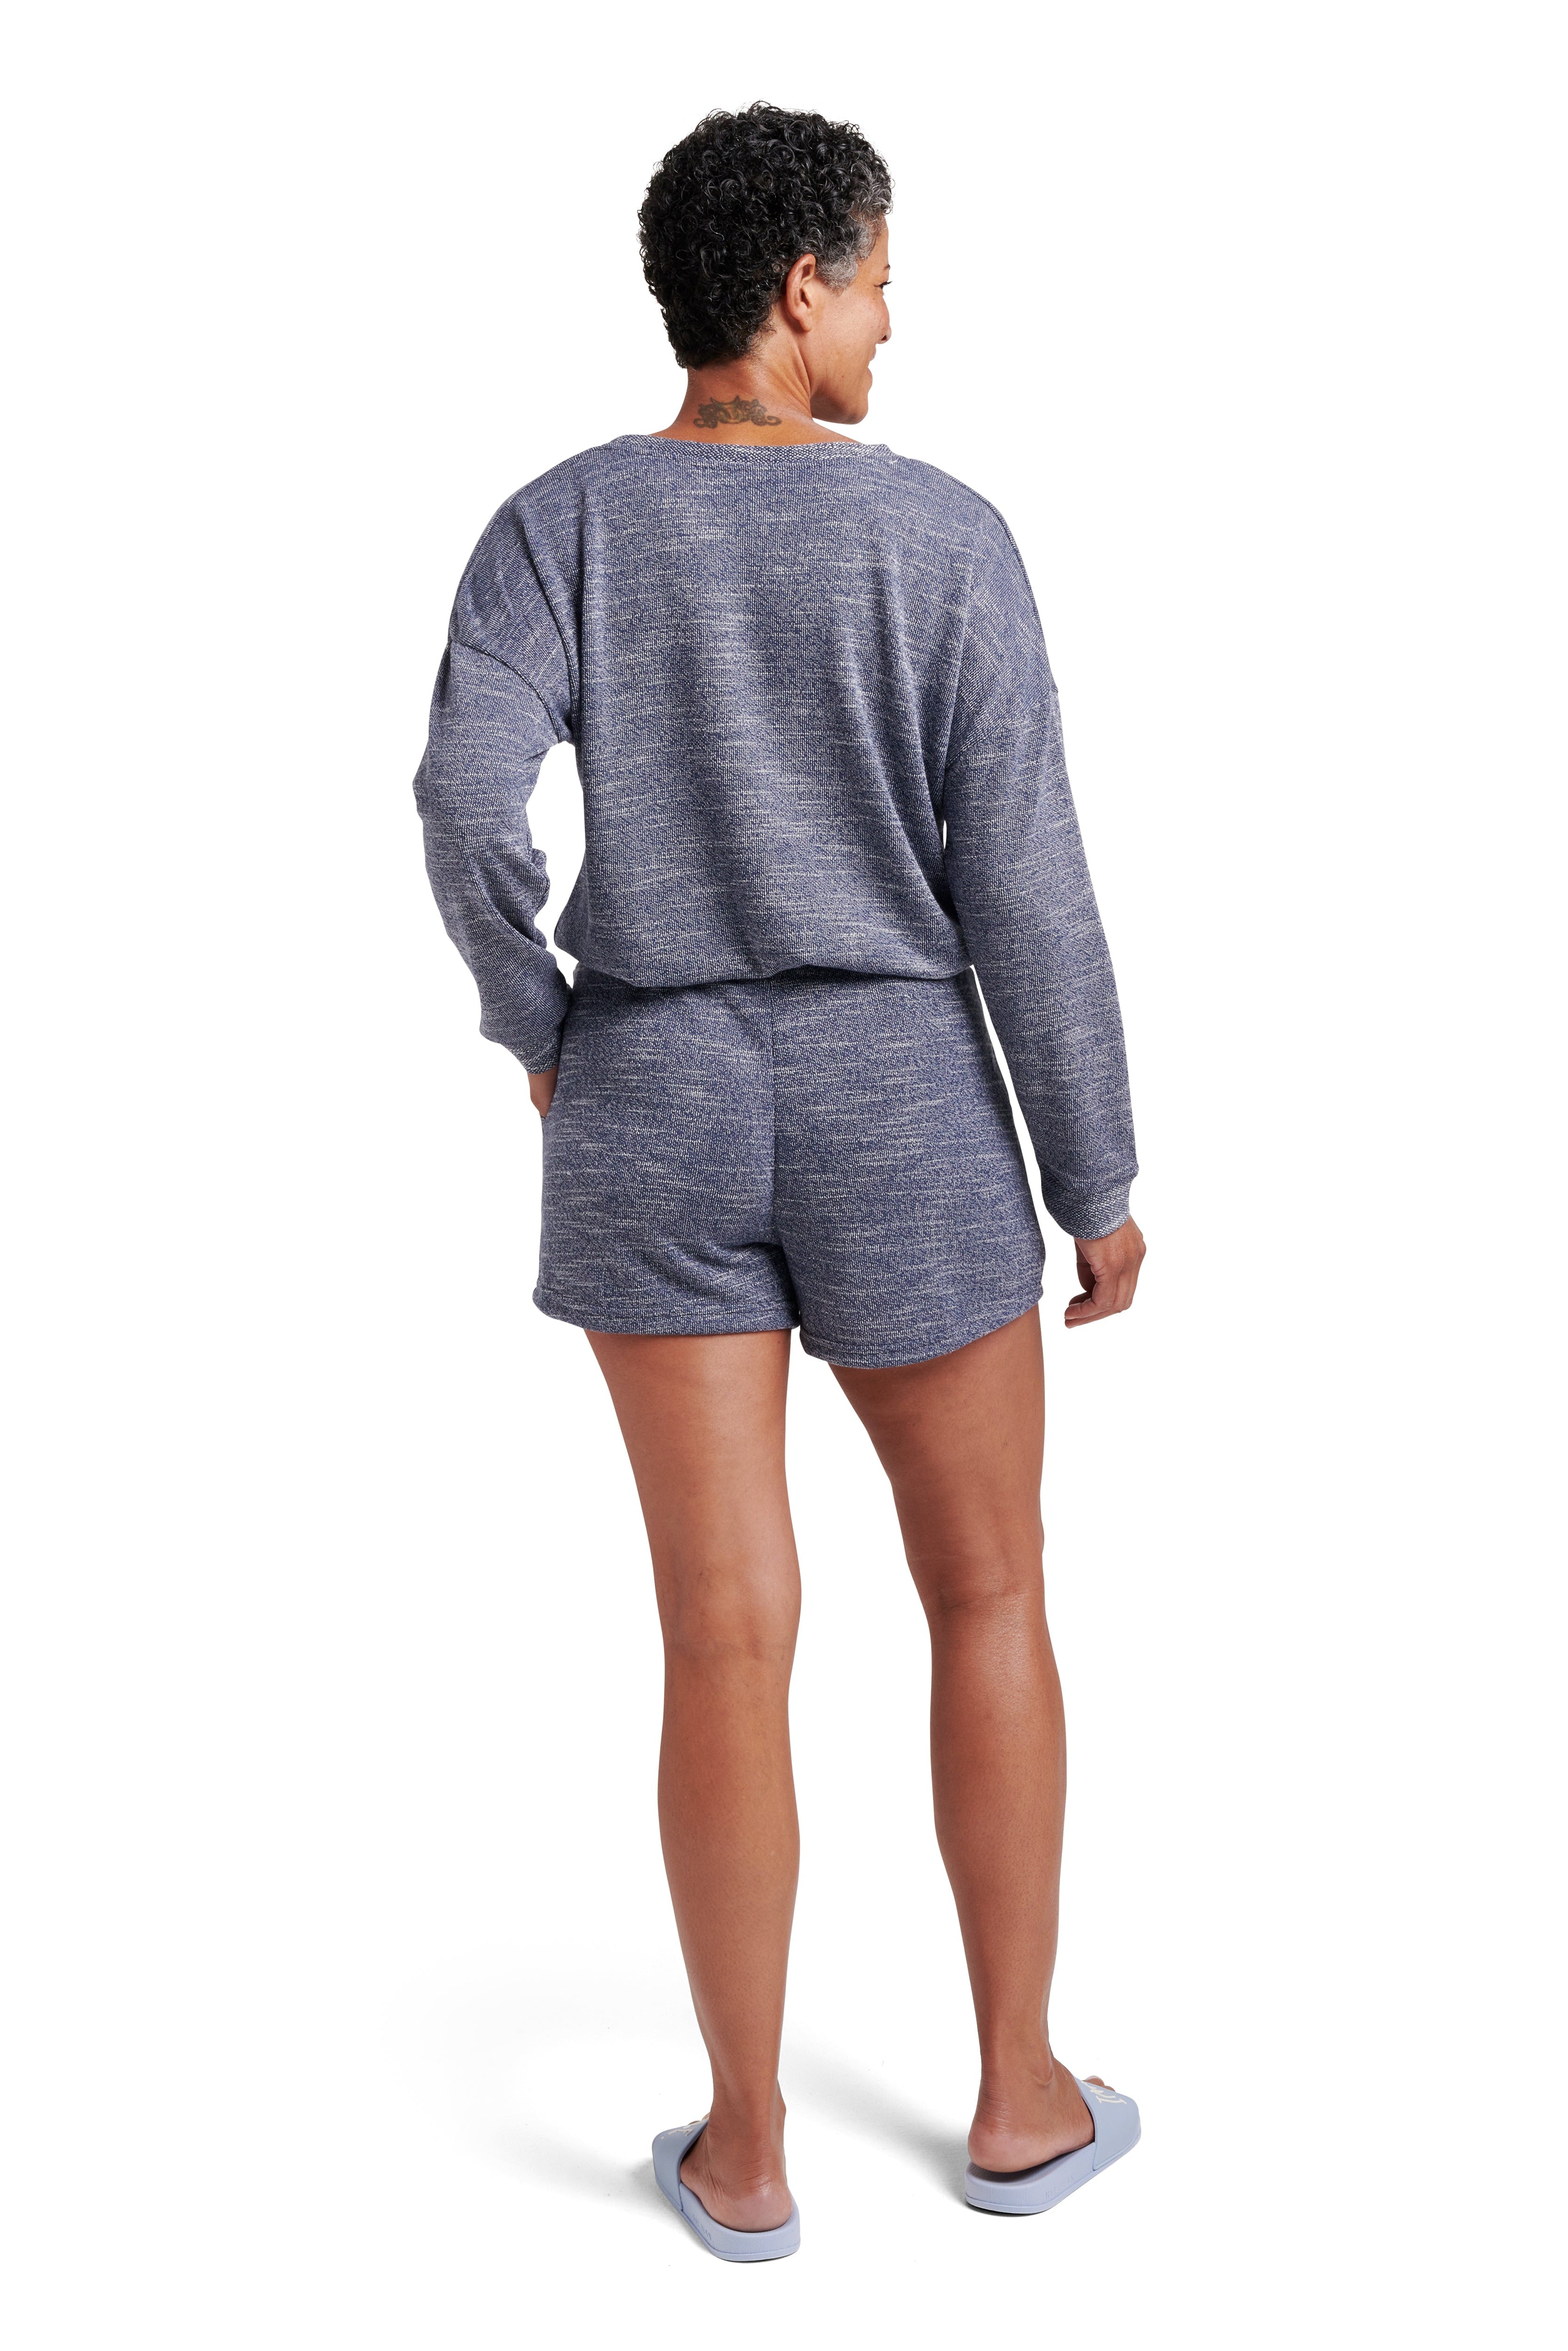 Women's Knit Terry Drawstring Shorts with Pockets - Rae Dunn Wear